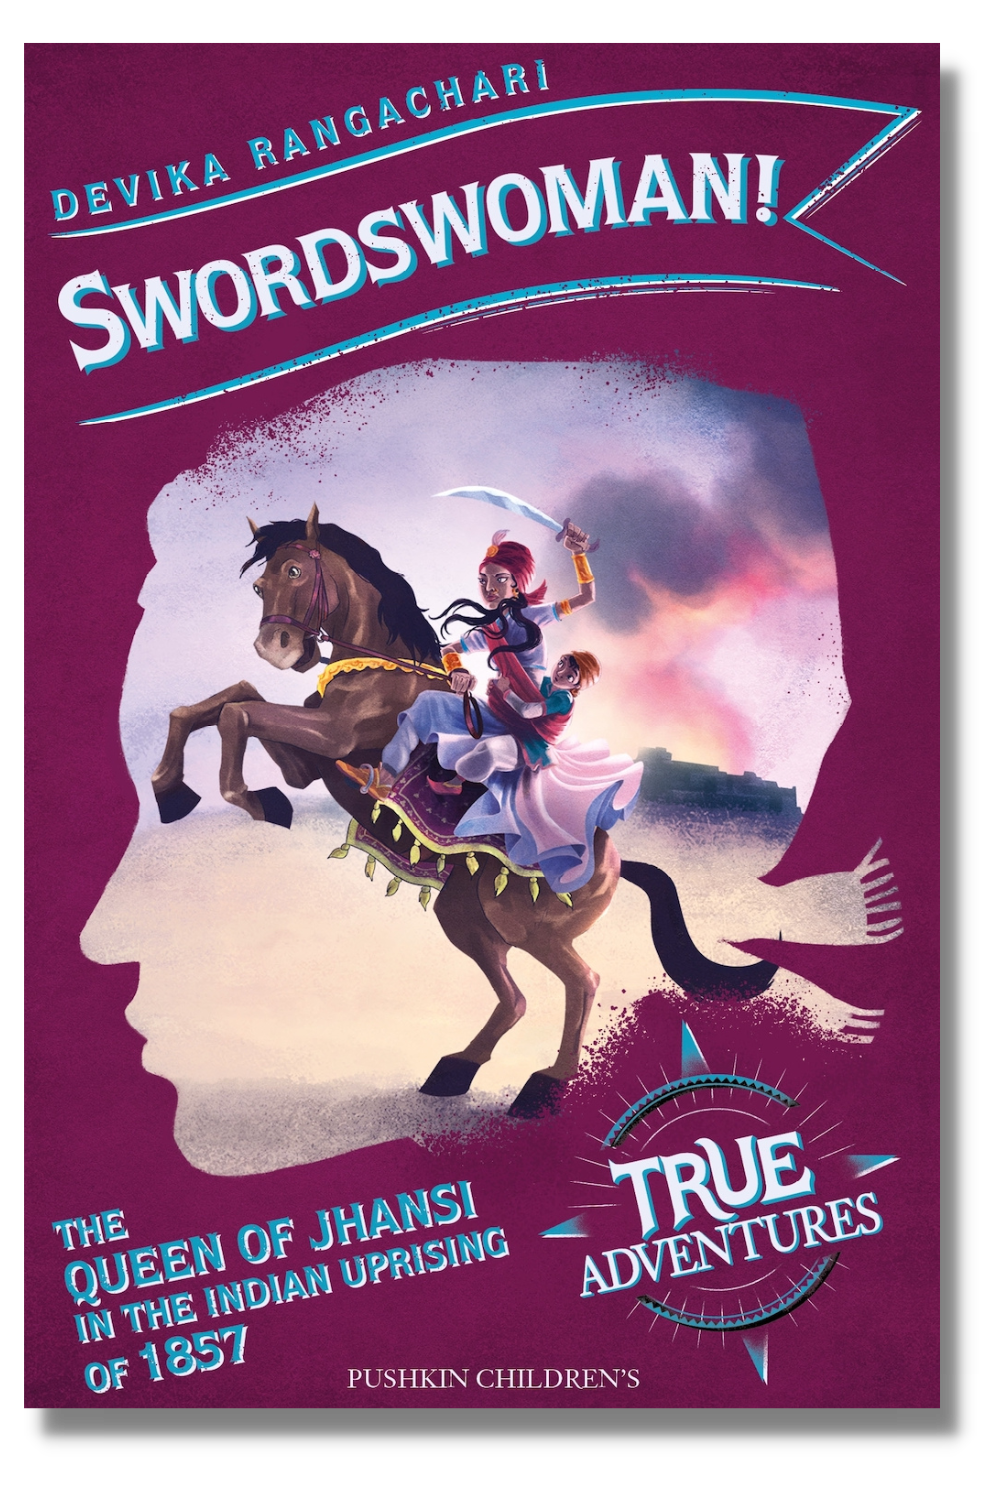 The cover of "Swordswoman!"